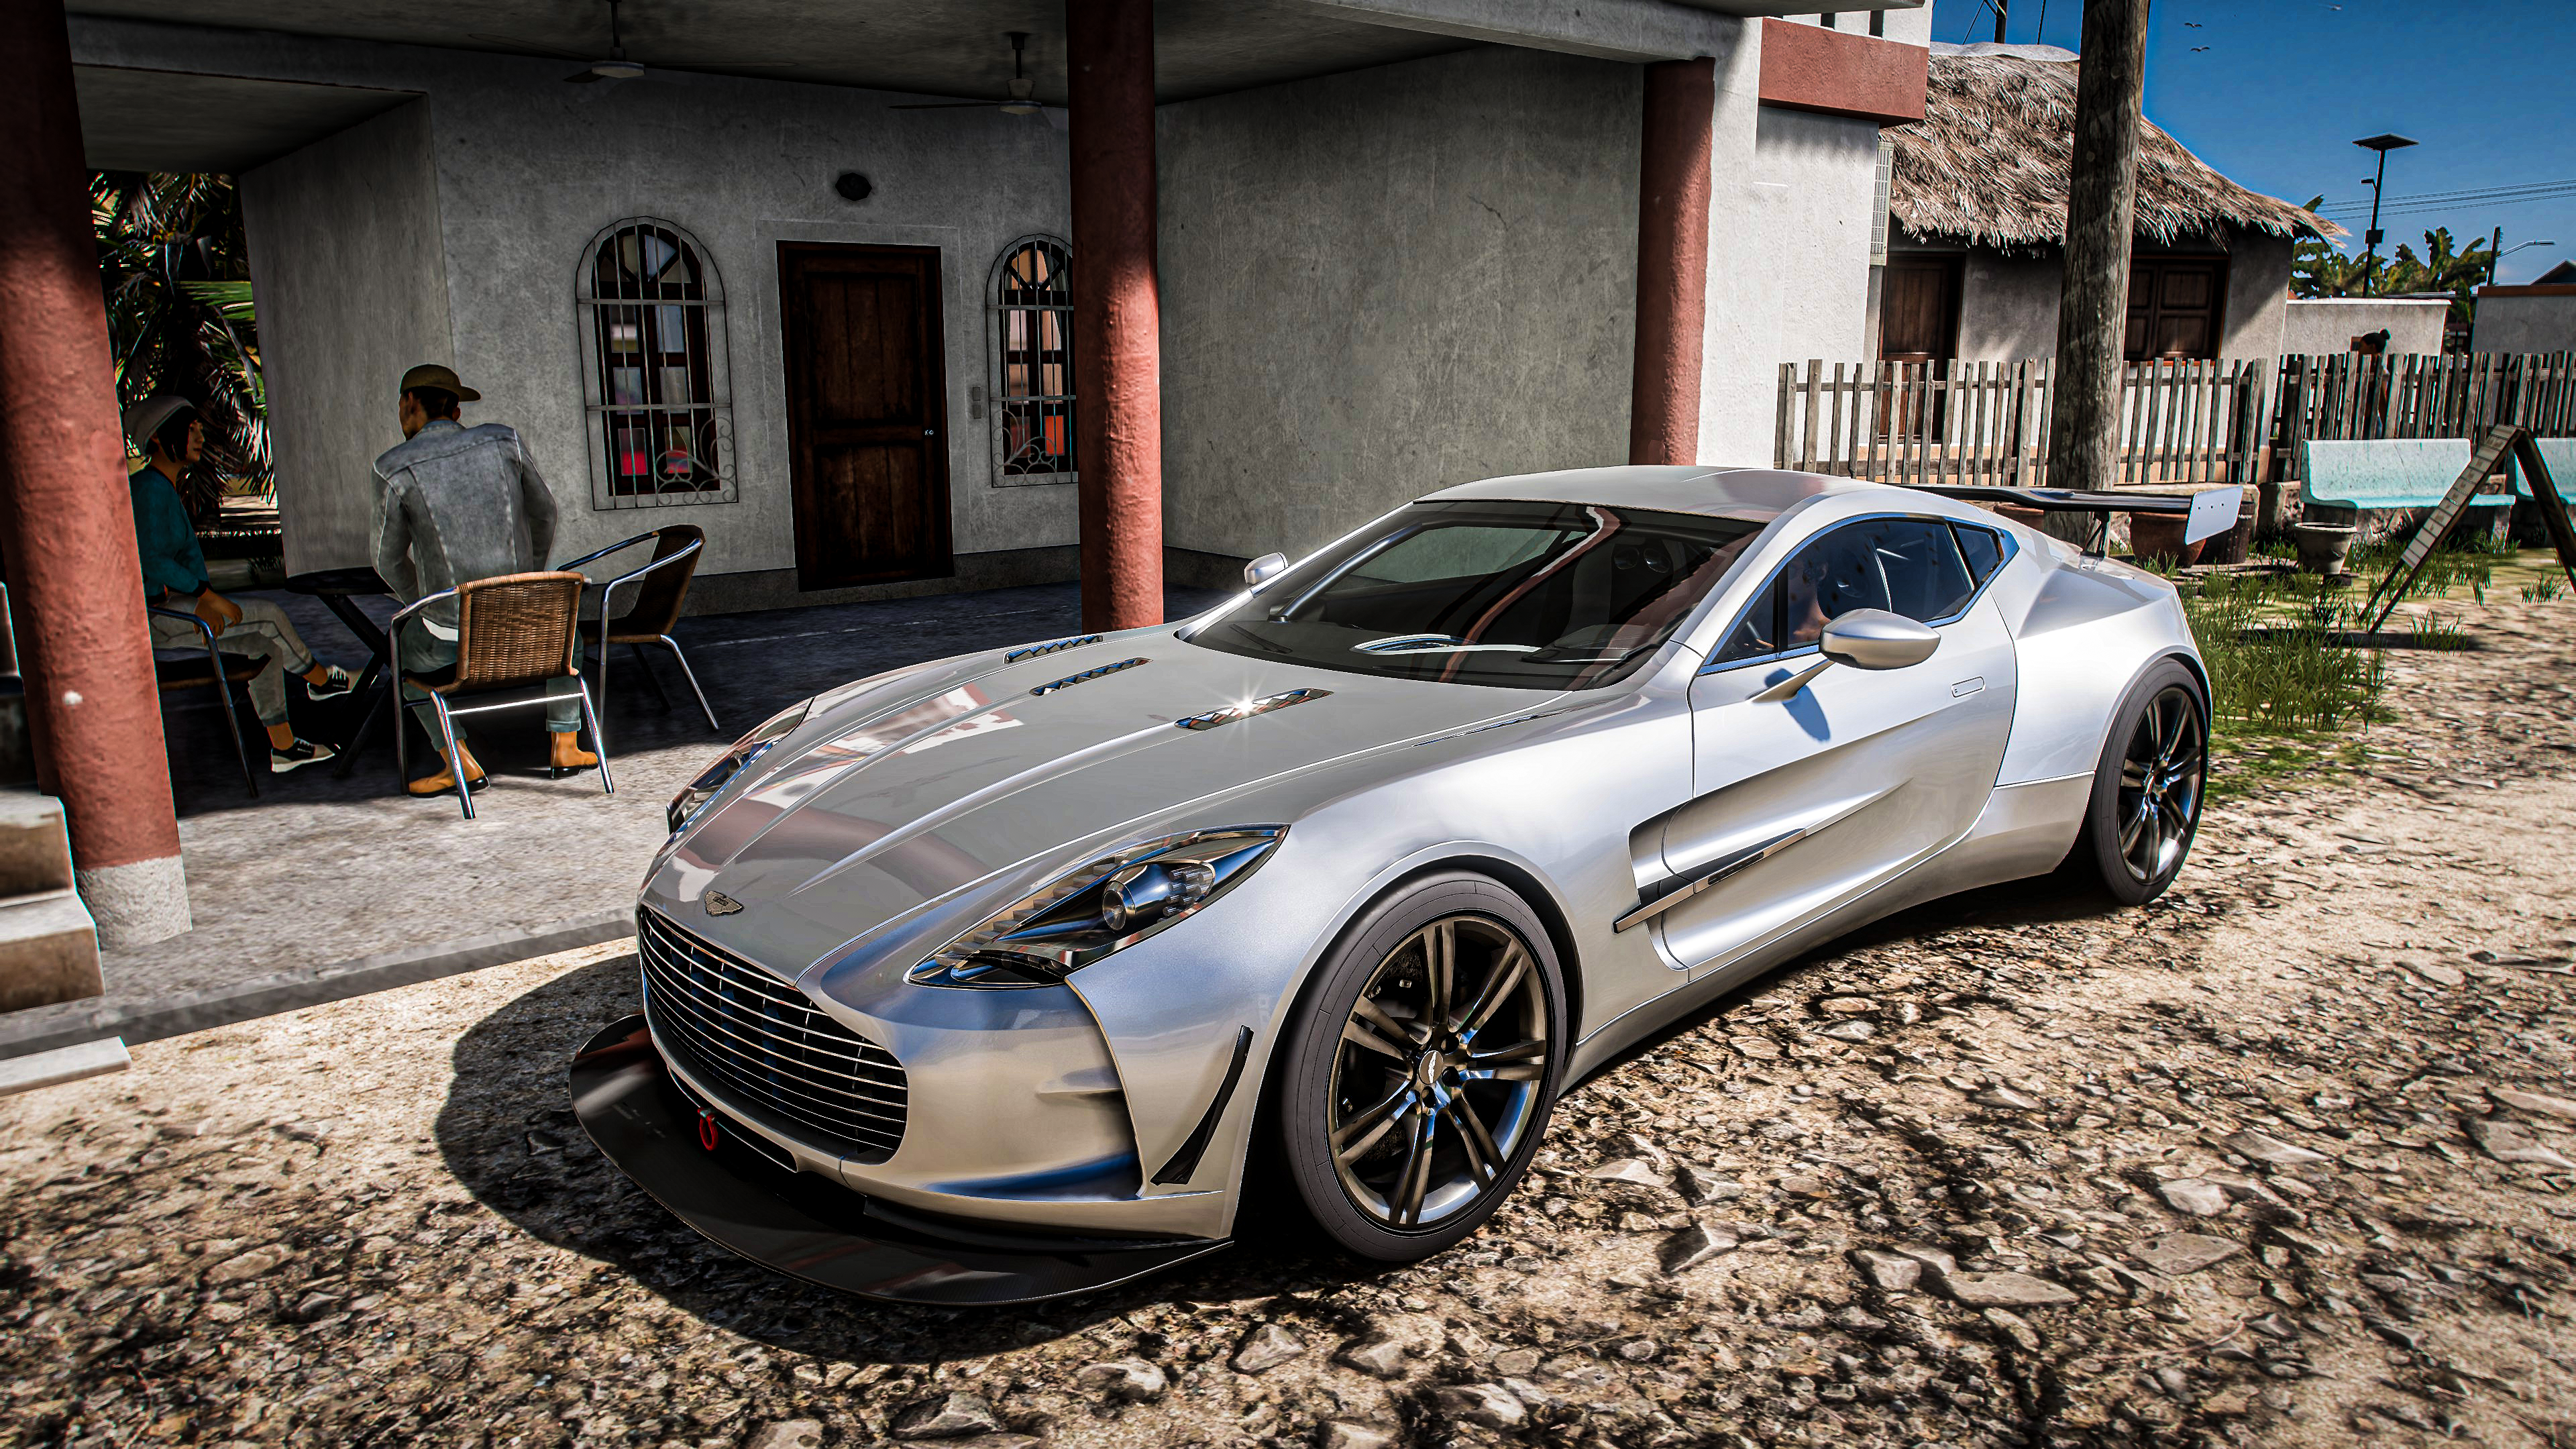 General 3840x2160 Forza Horizon 5 Forza Forza Horizon Aston Martin Aston Martin One 77 car vehicle realistic video games video game art people Mexican supercars race cars CGI video game characters